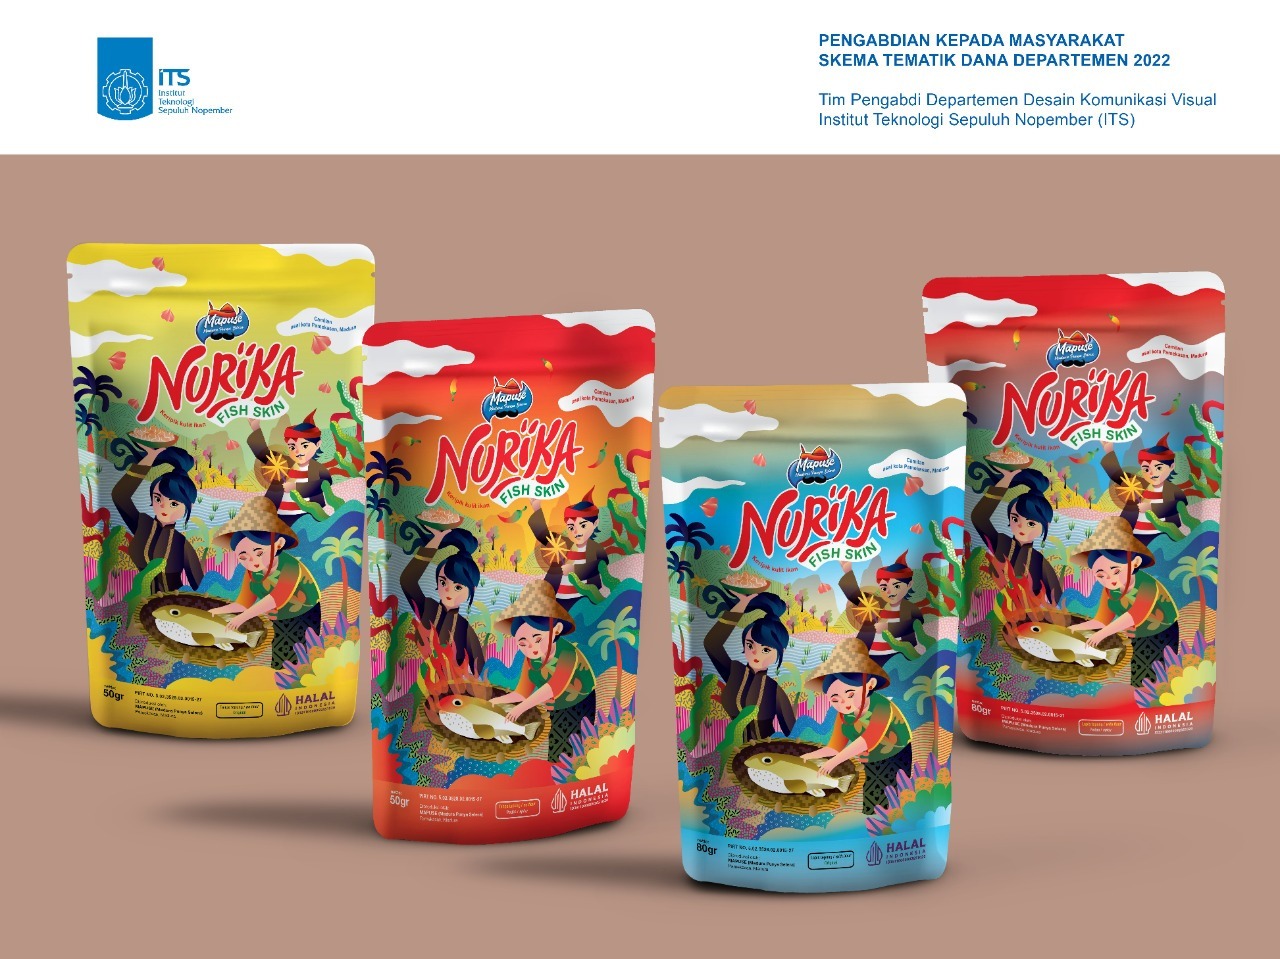 The packaging design for the Nurika brand fish skin snack product (UKM Mapuse) designed by the Abmas team from the ITS DKV